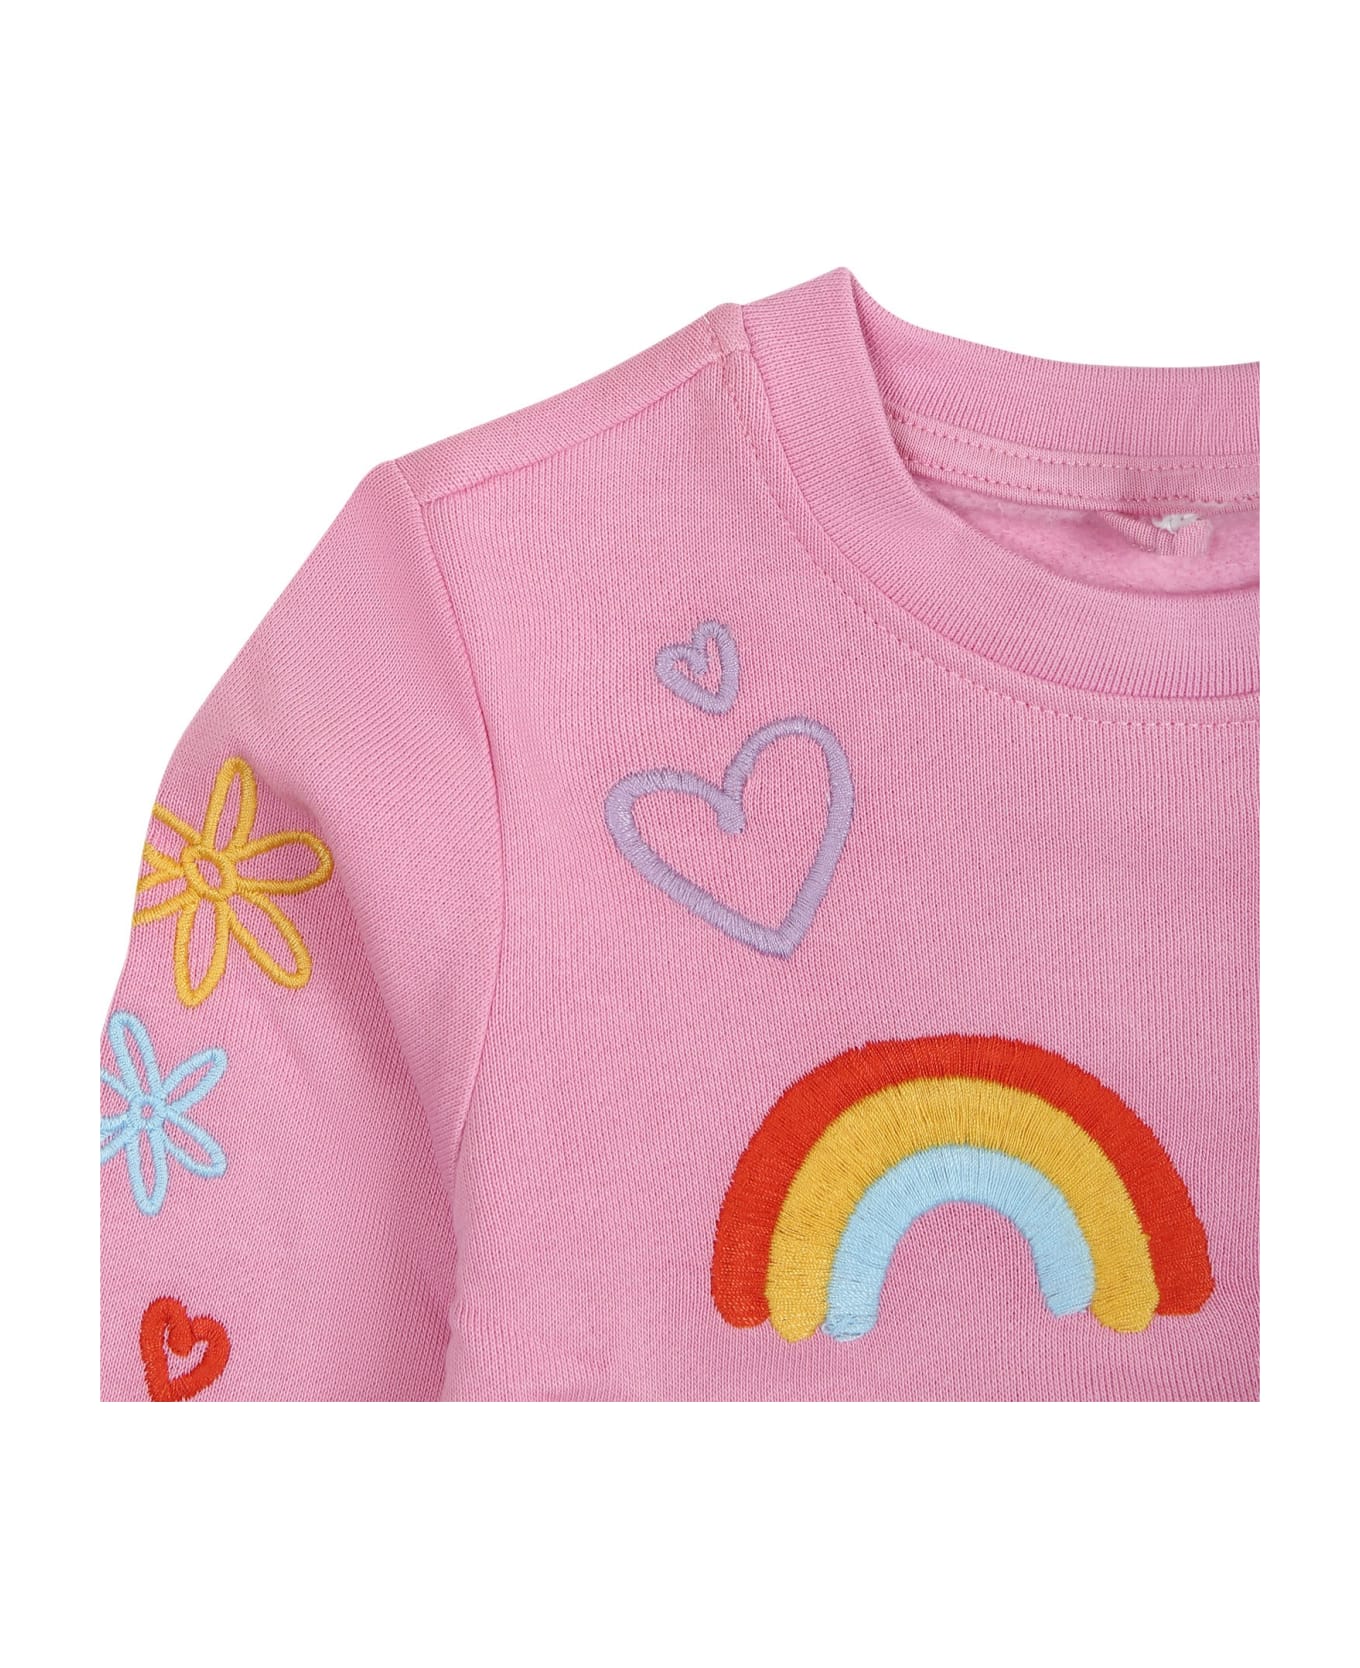 Stella McCartney Kids Pink Sweatshirt For Baby Girl With All-over Multicolor Embroidery - Pink